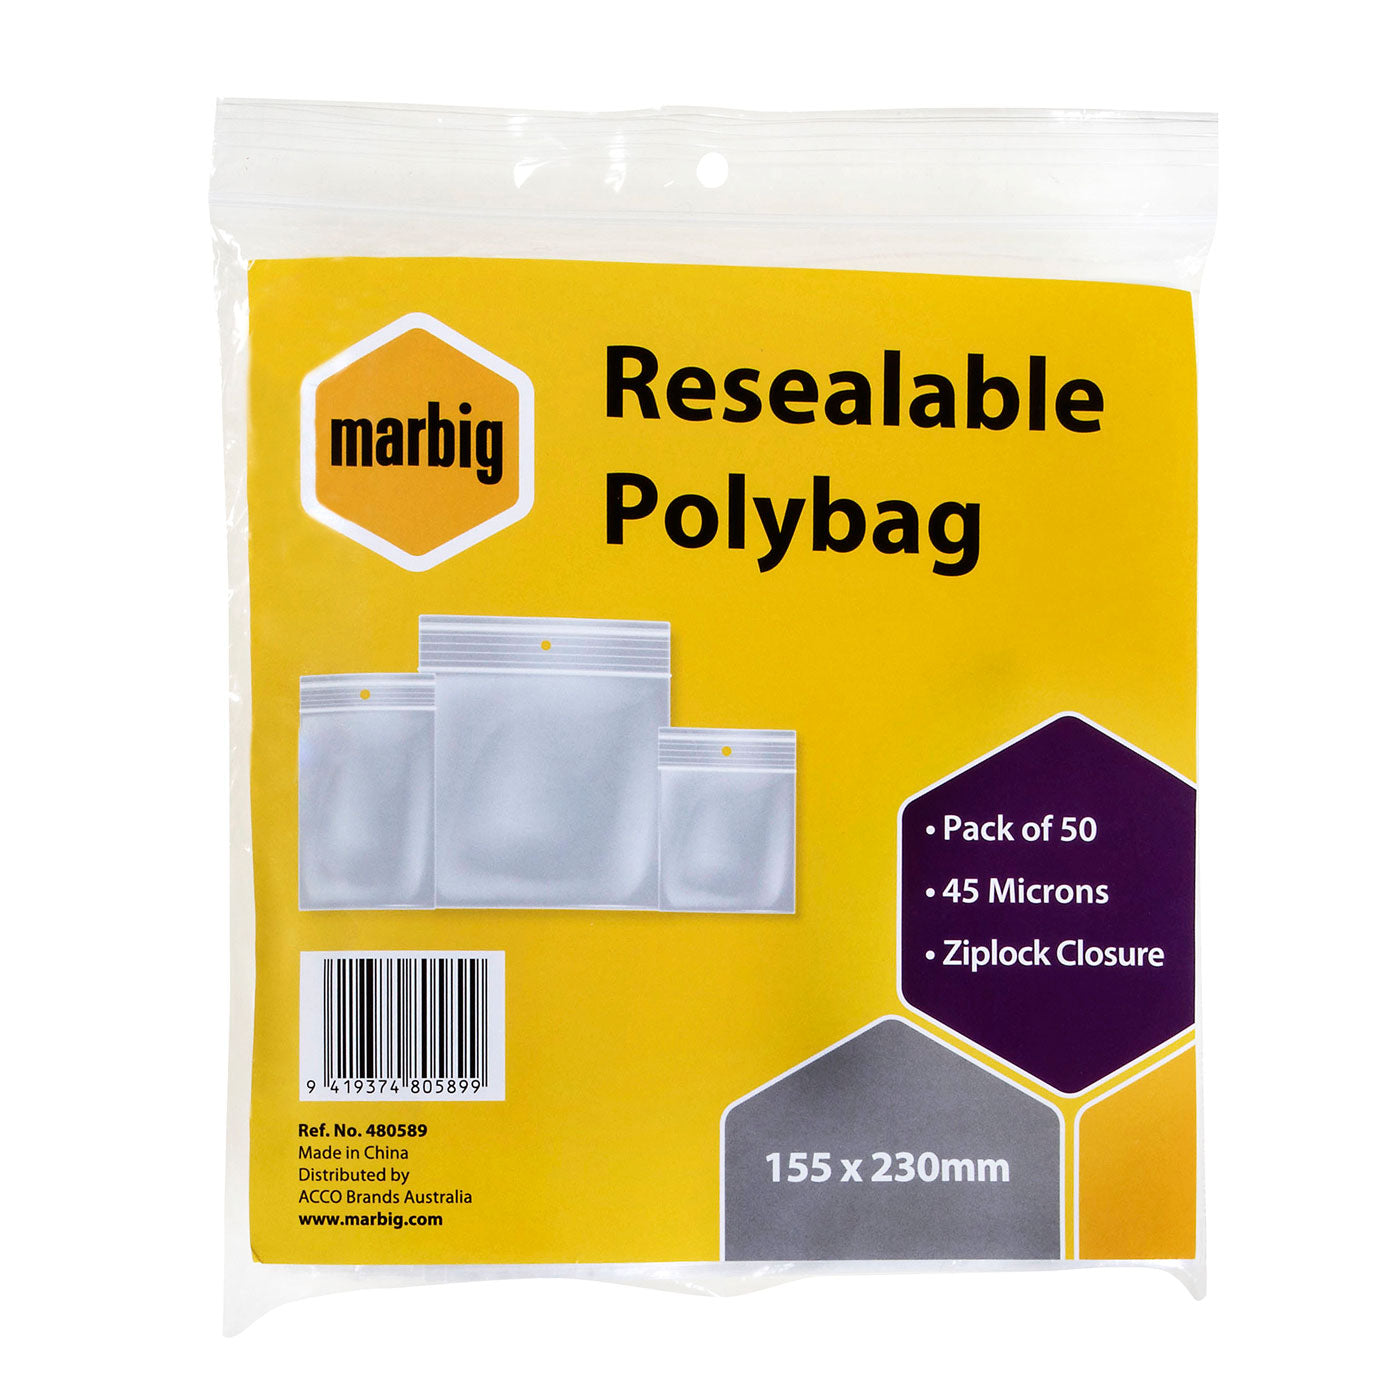 Marbig Resealable Polybag Zip Lock 155 x 230 mm Pack of 50